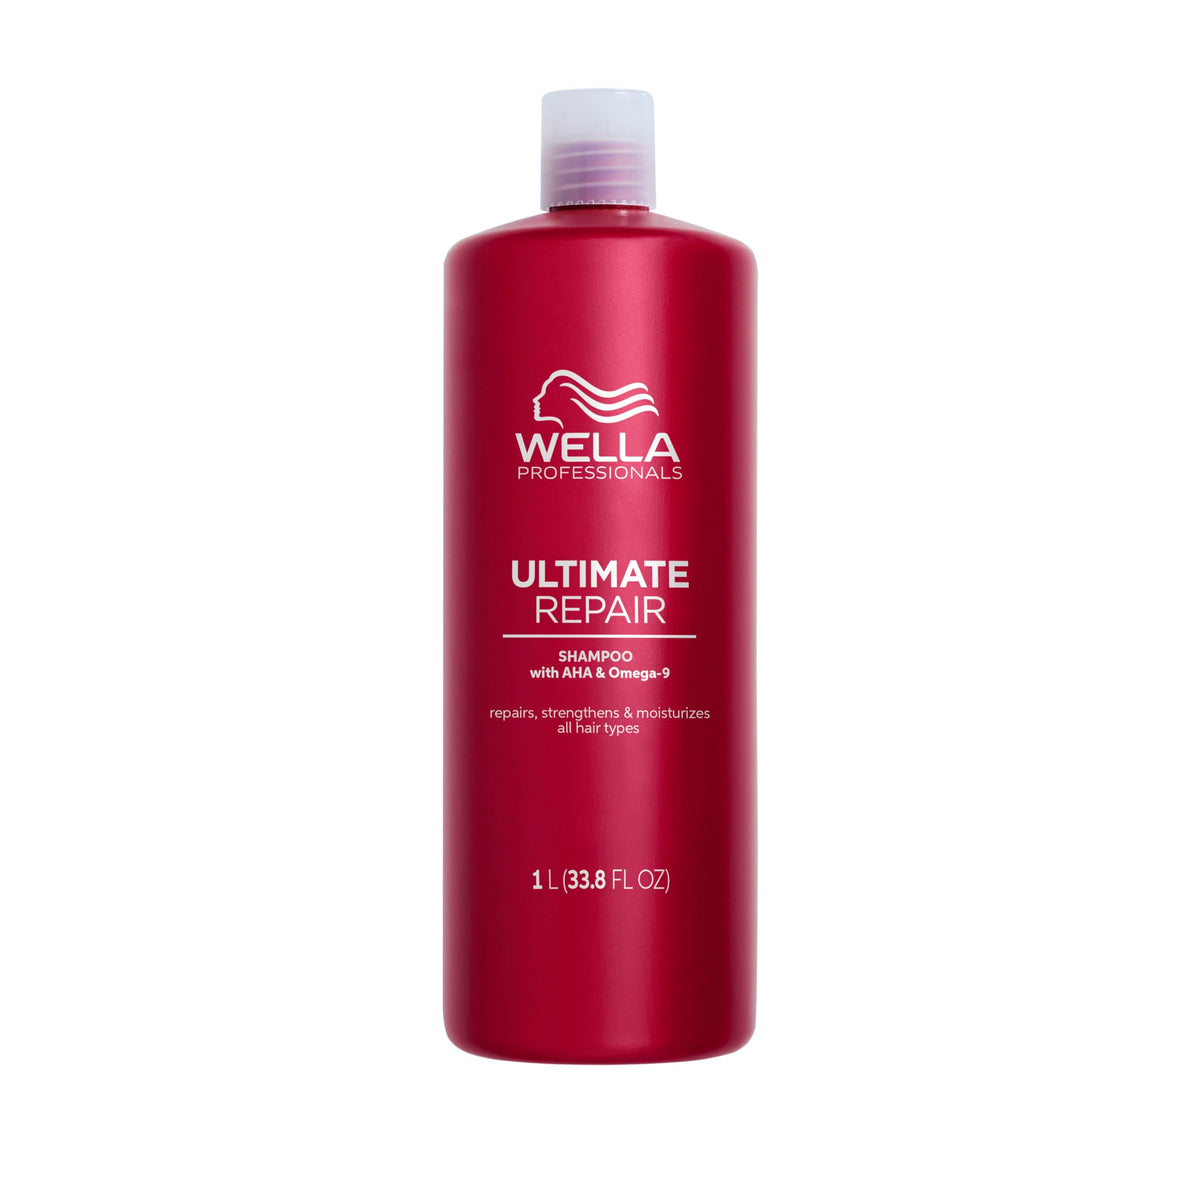 Wella Professionals Ultimate Repair Shampoo for All Types of Hair Damage 1000ml